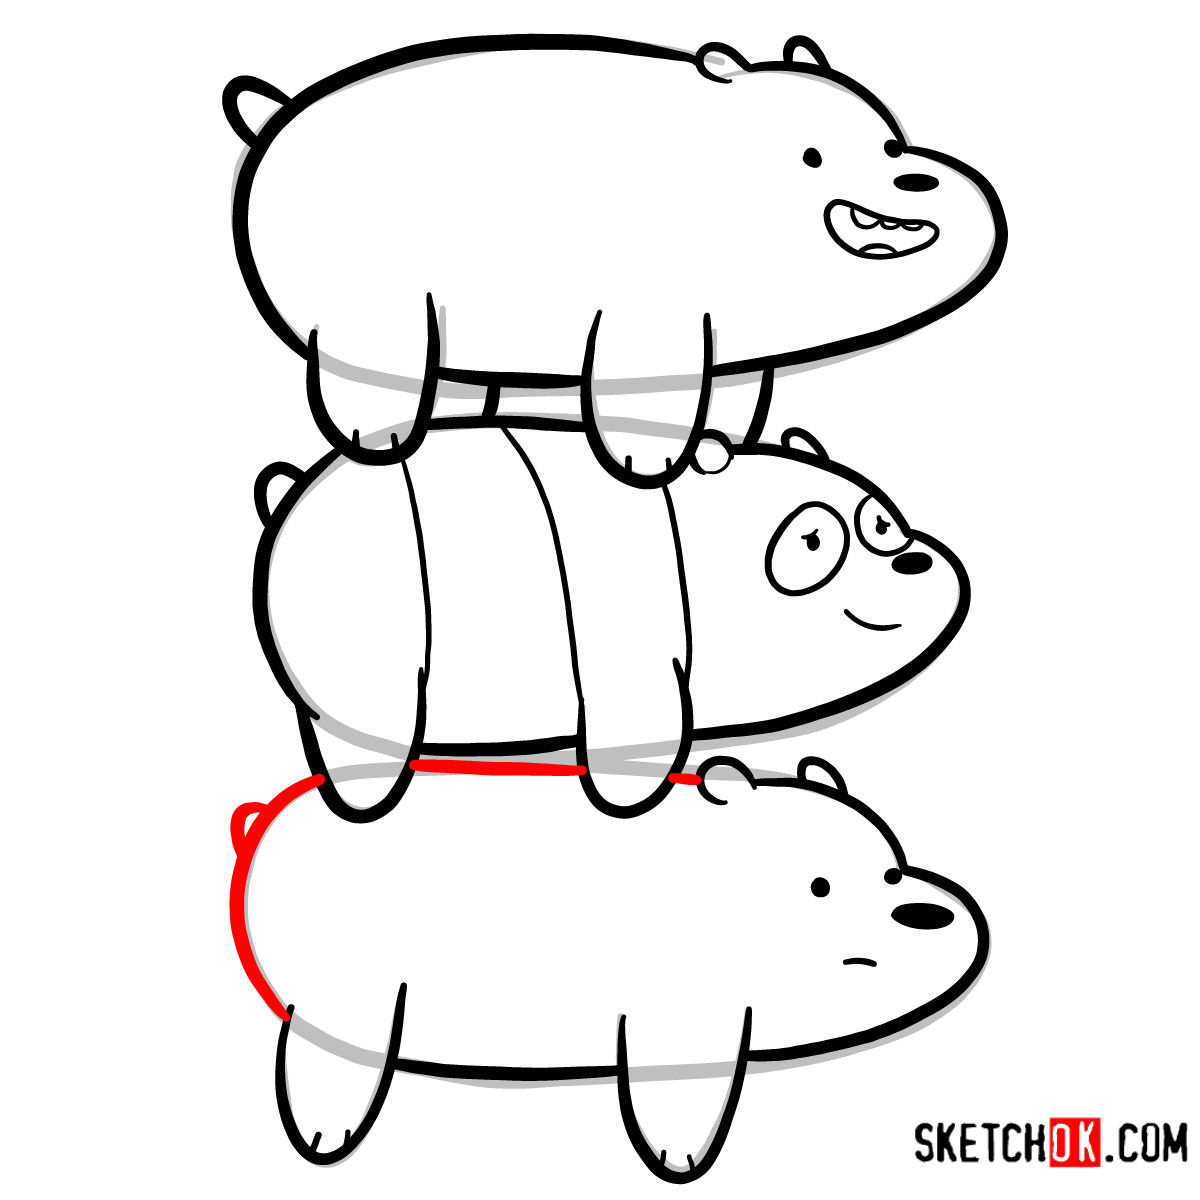 How to draw the bears standing on each others back | We Bare Bears - step 14